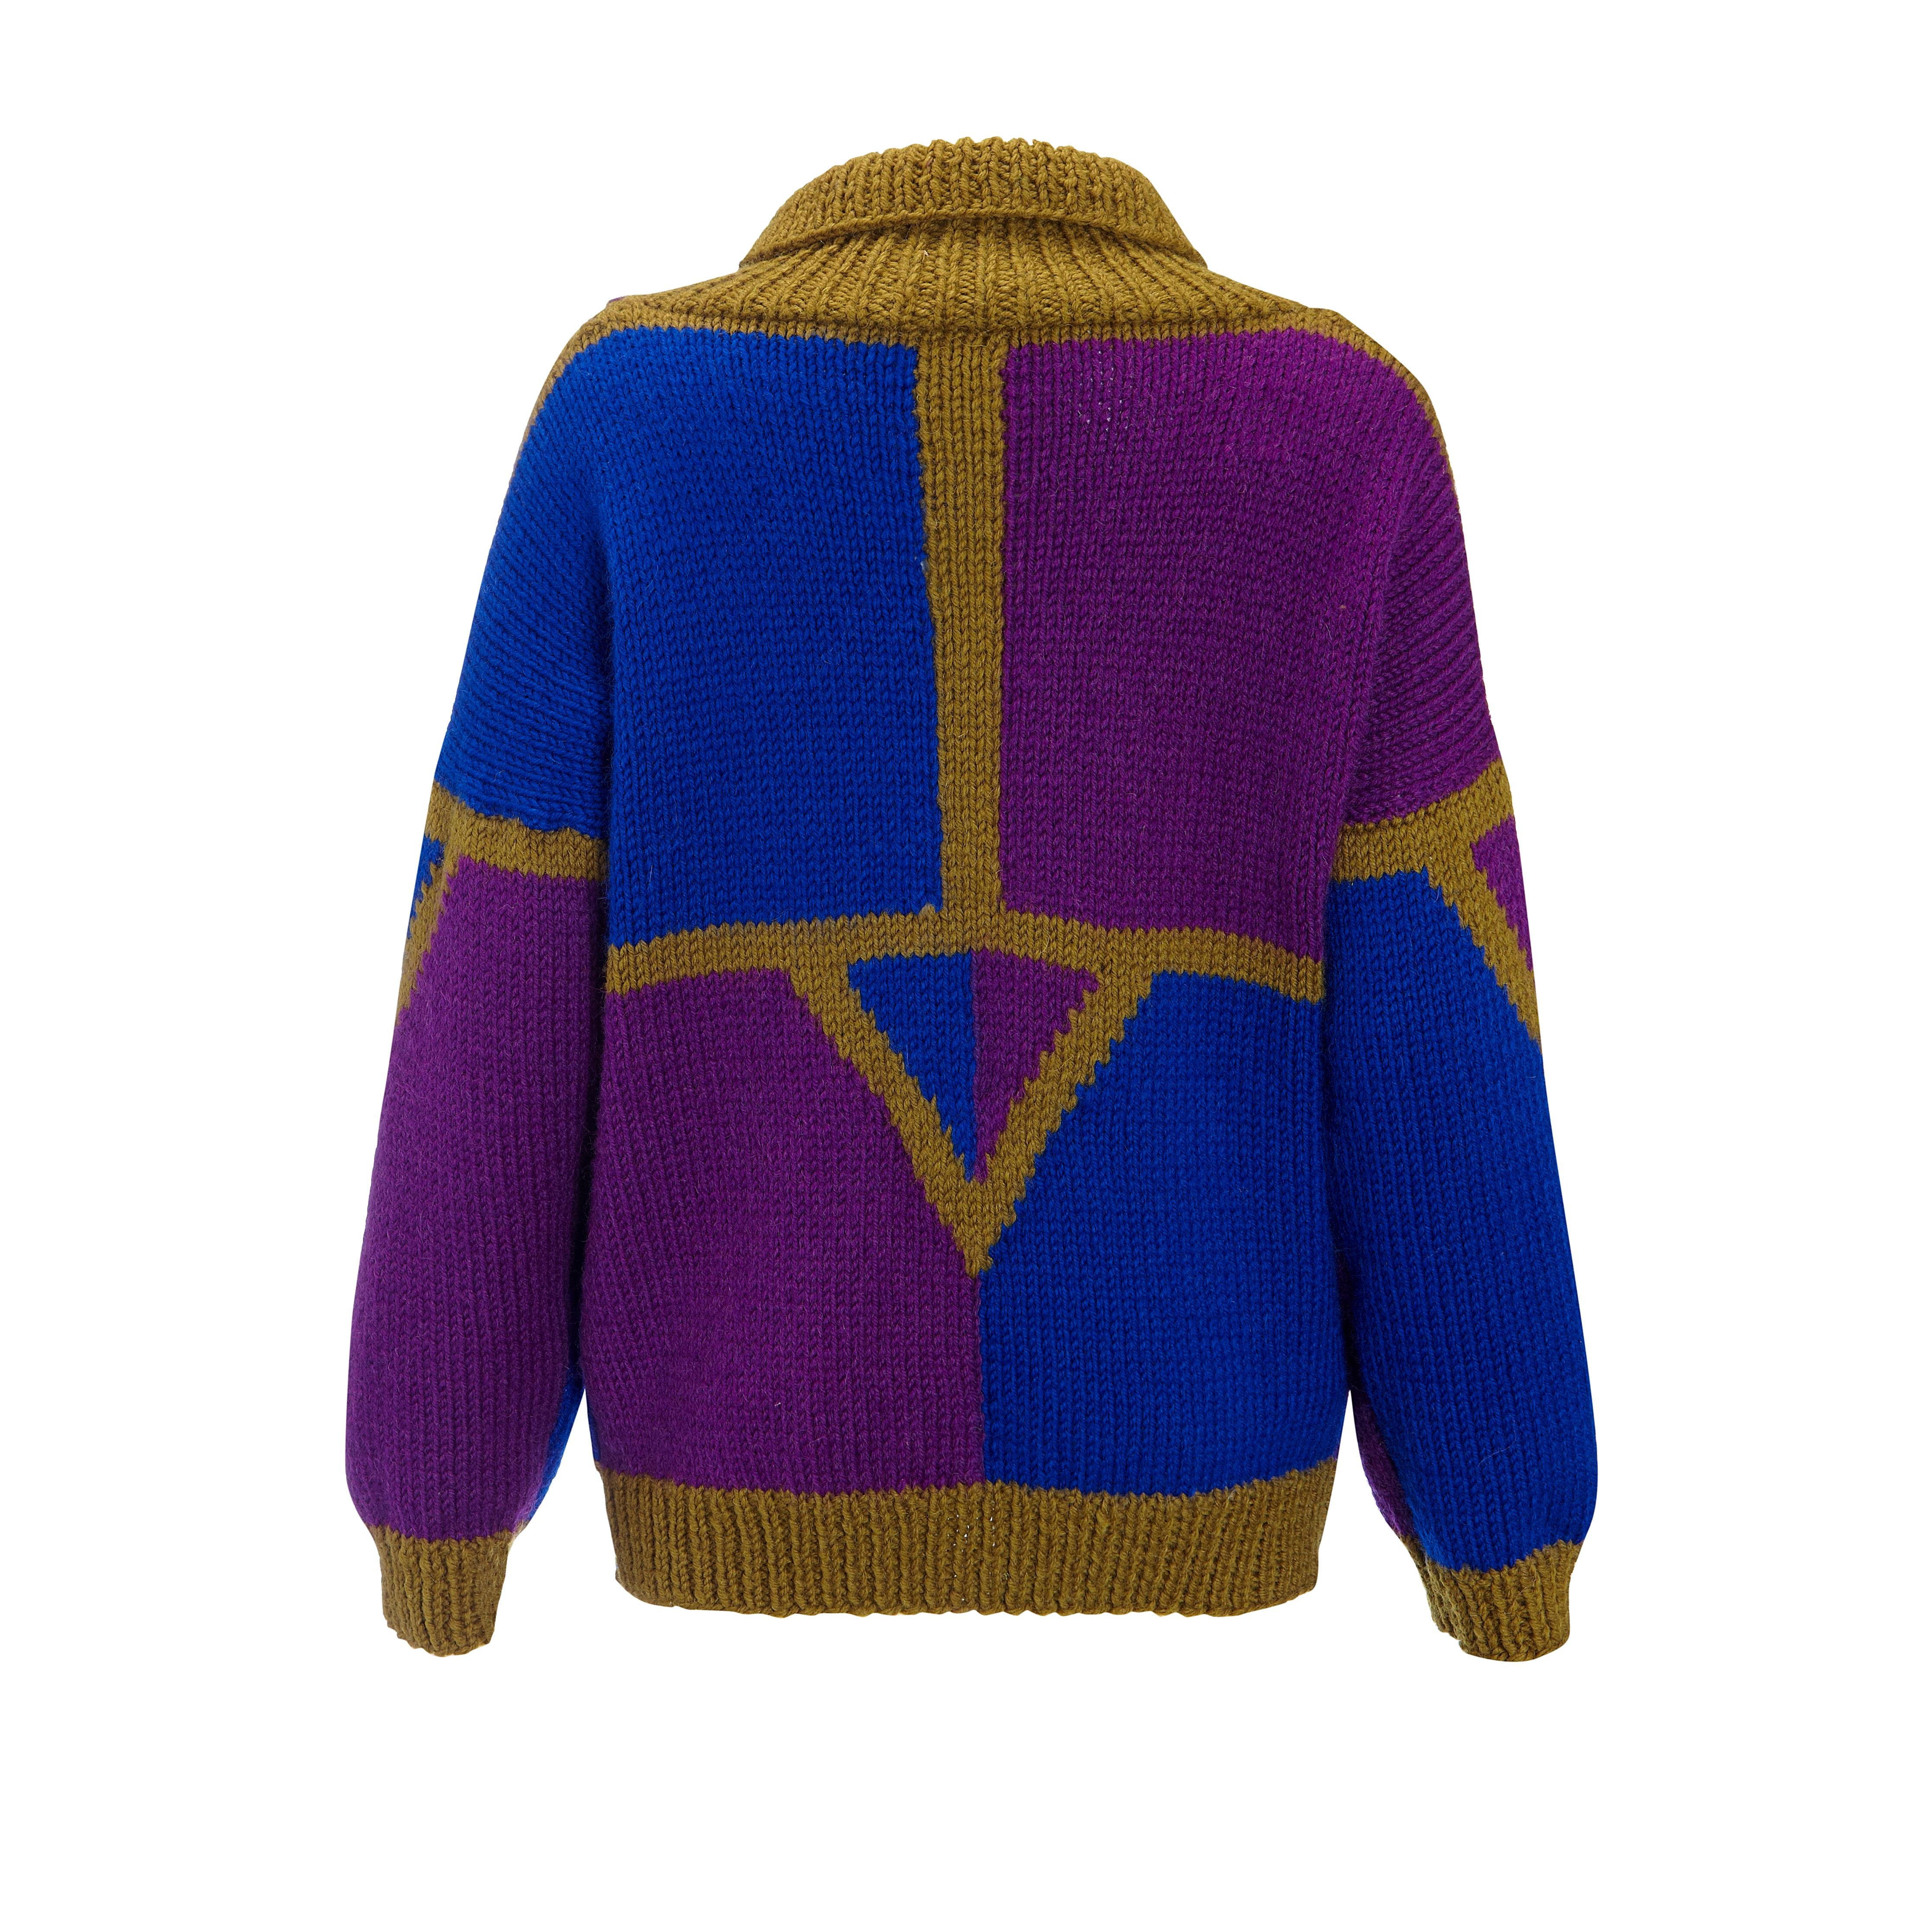 1980s Vintage Cardigan - Khaki Blue & Purple - Hand Knitted In Good Condition For Sale In KENT, GB